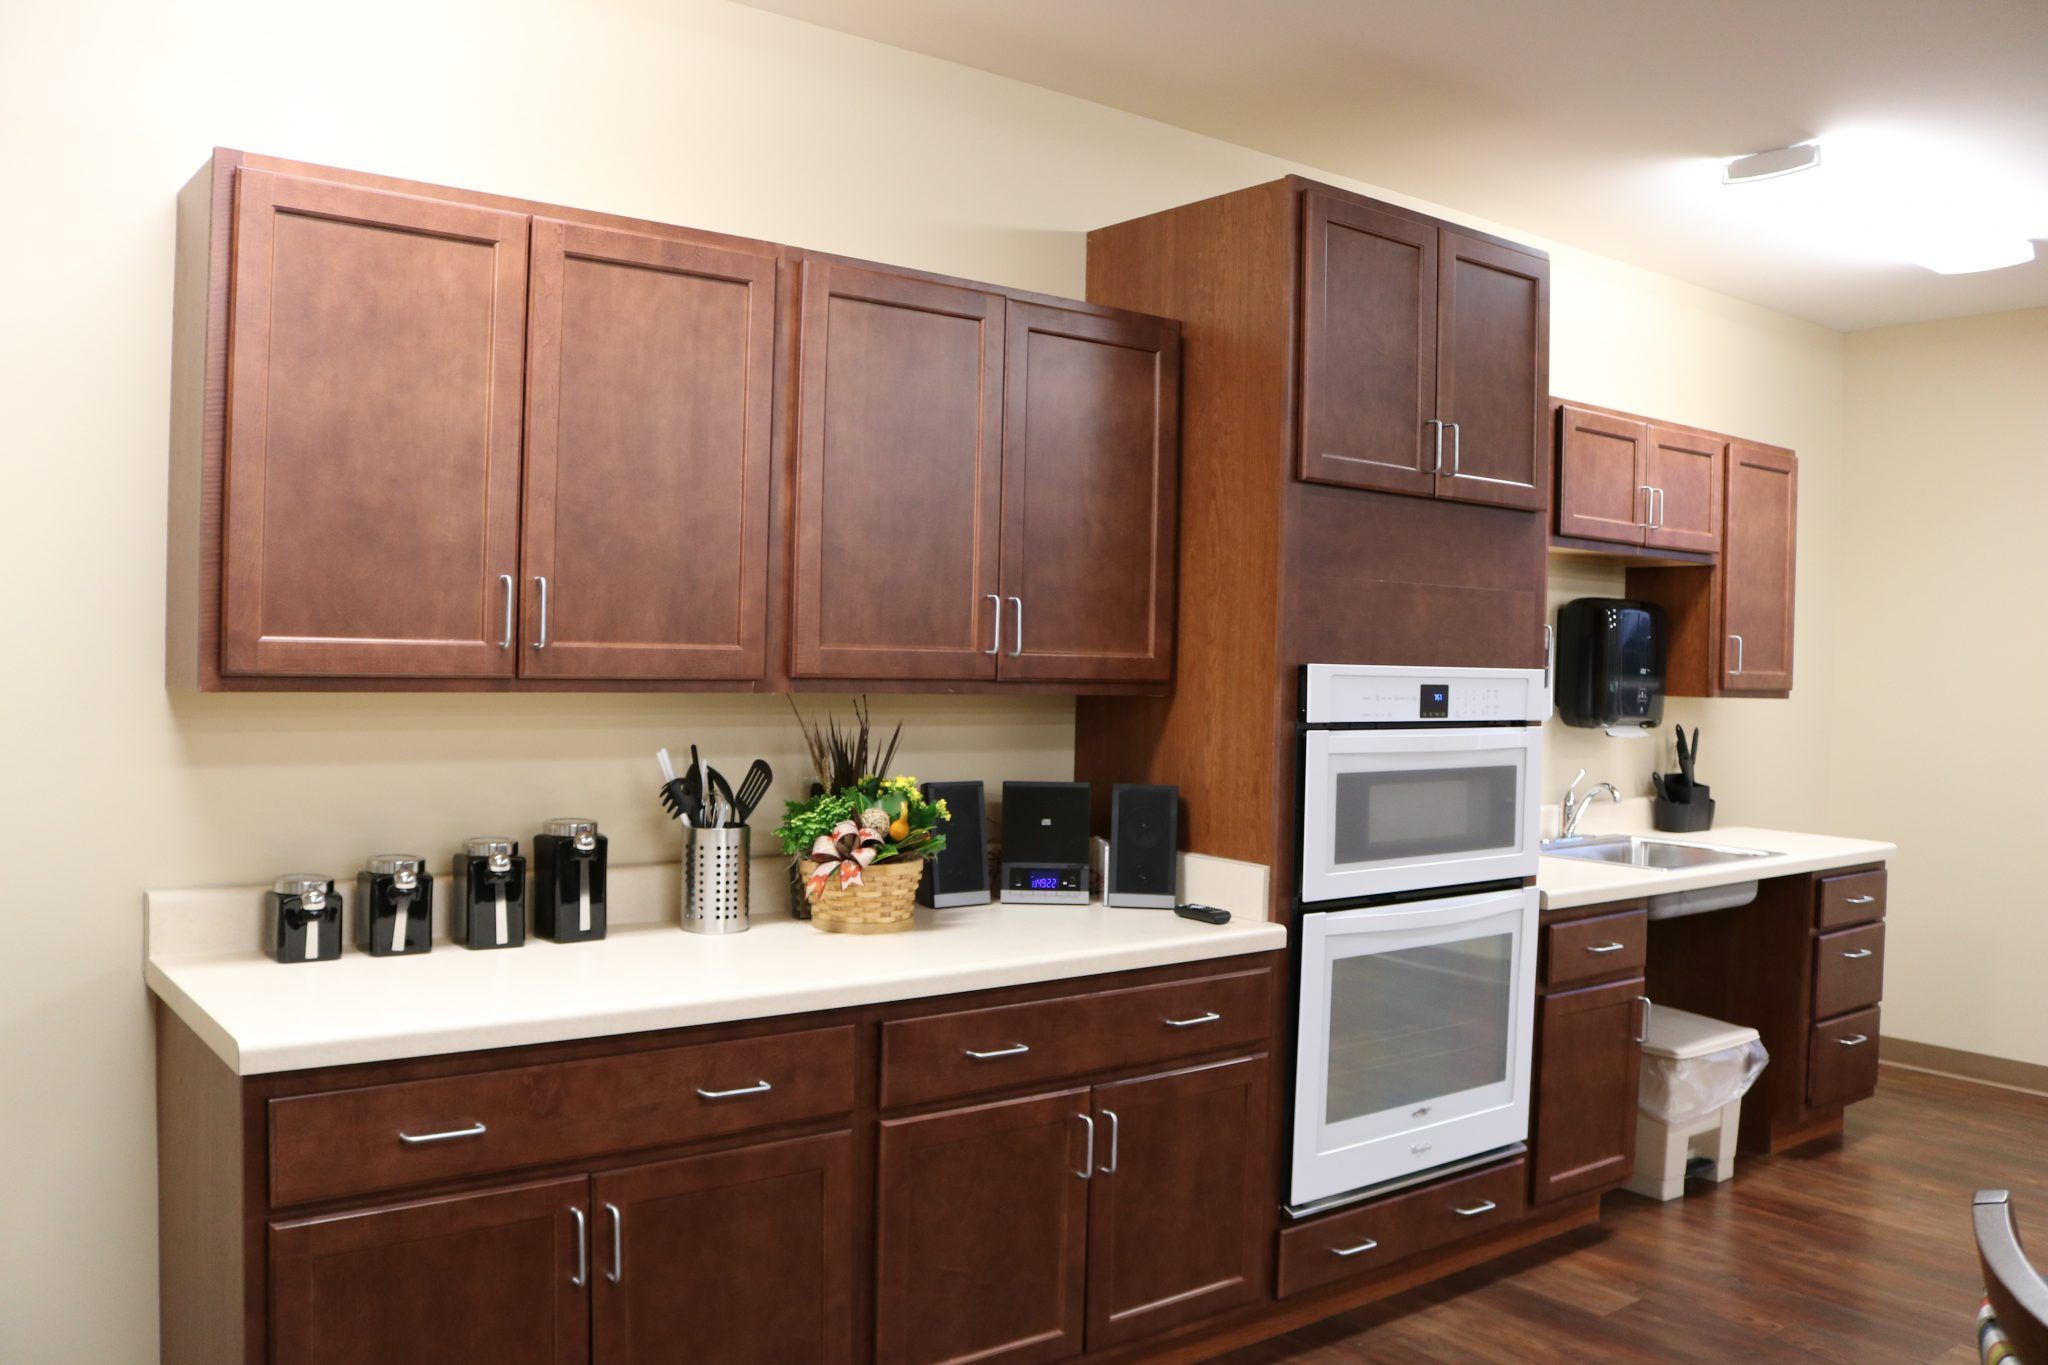 Interior view of Lacey Creek Supportive Living with modern kitchen appliances and furniture.